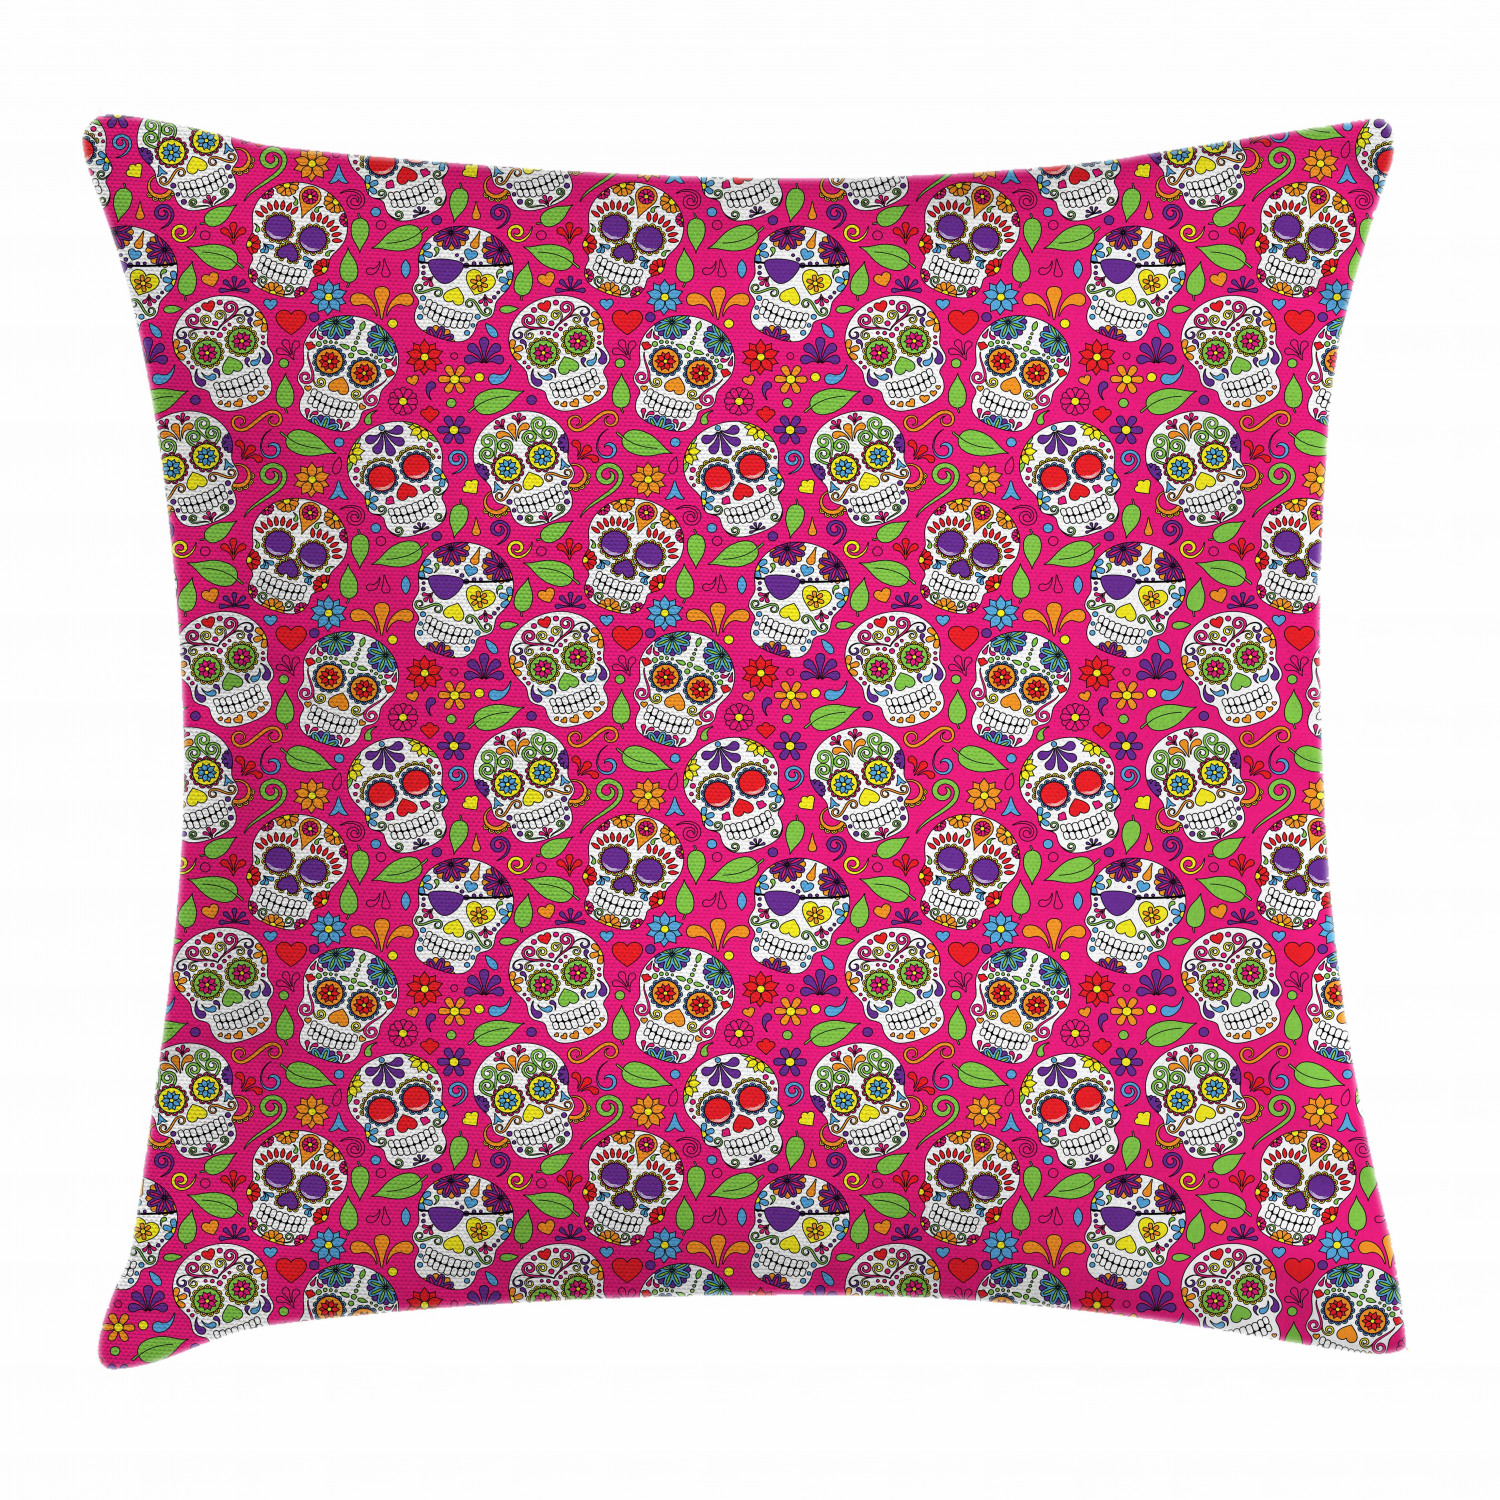 Sugar Skull Throw Pillow Cushion Cover, Mexican National Holiday Inspired Colorful Print with Repeating Doodle Skulls, Decorative Square Accent Pillow Case, 24 X 24 Inches, Multicolor, by Ambesonne - image 1 of 2